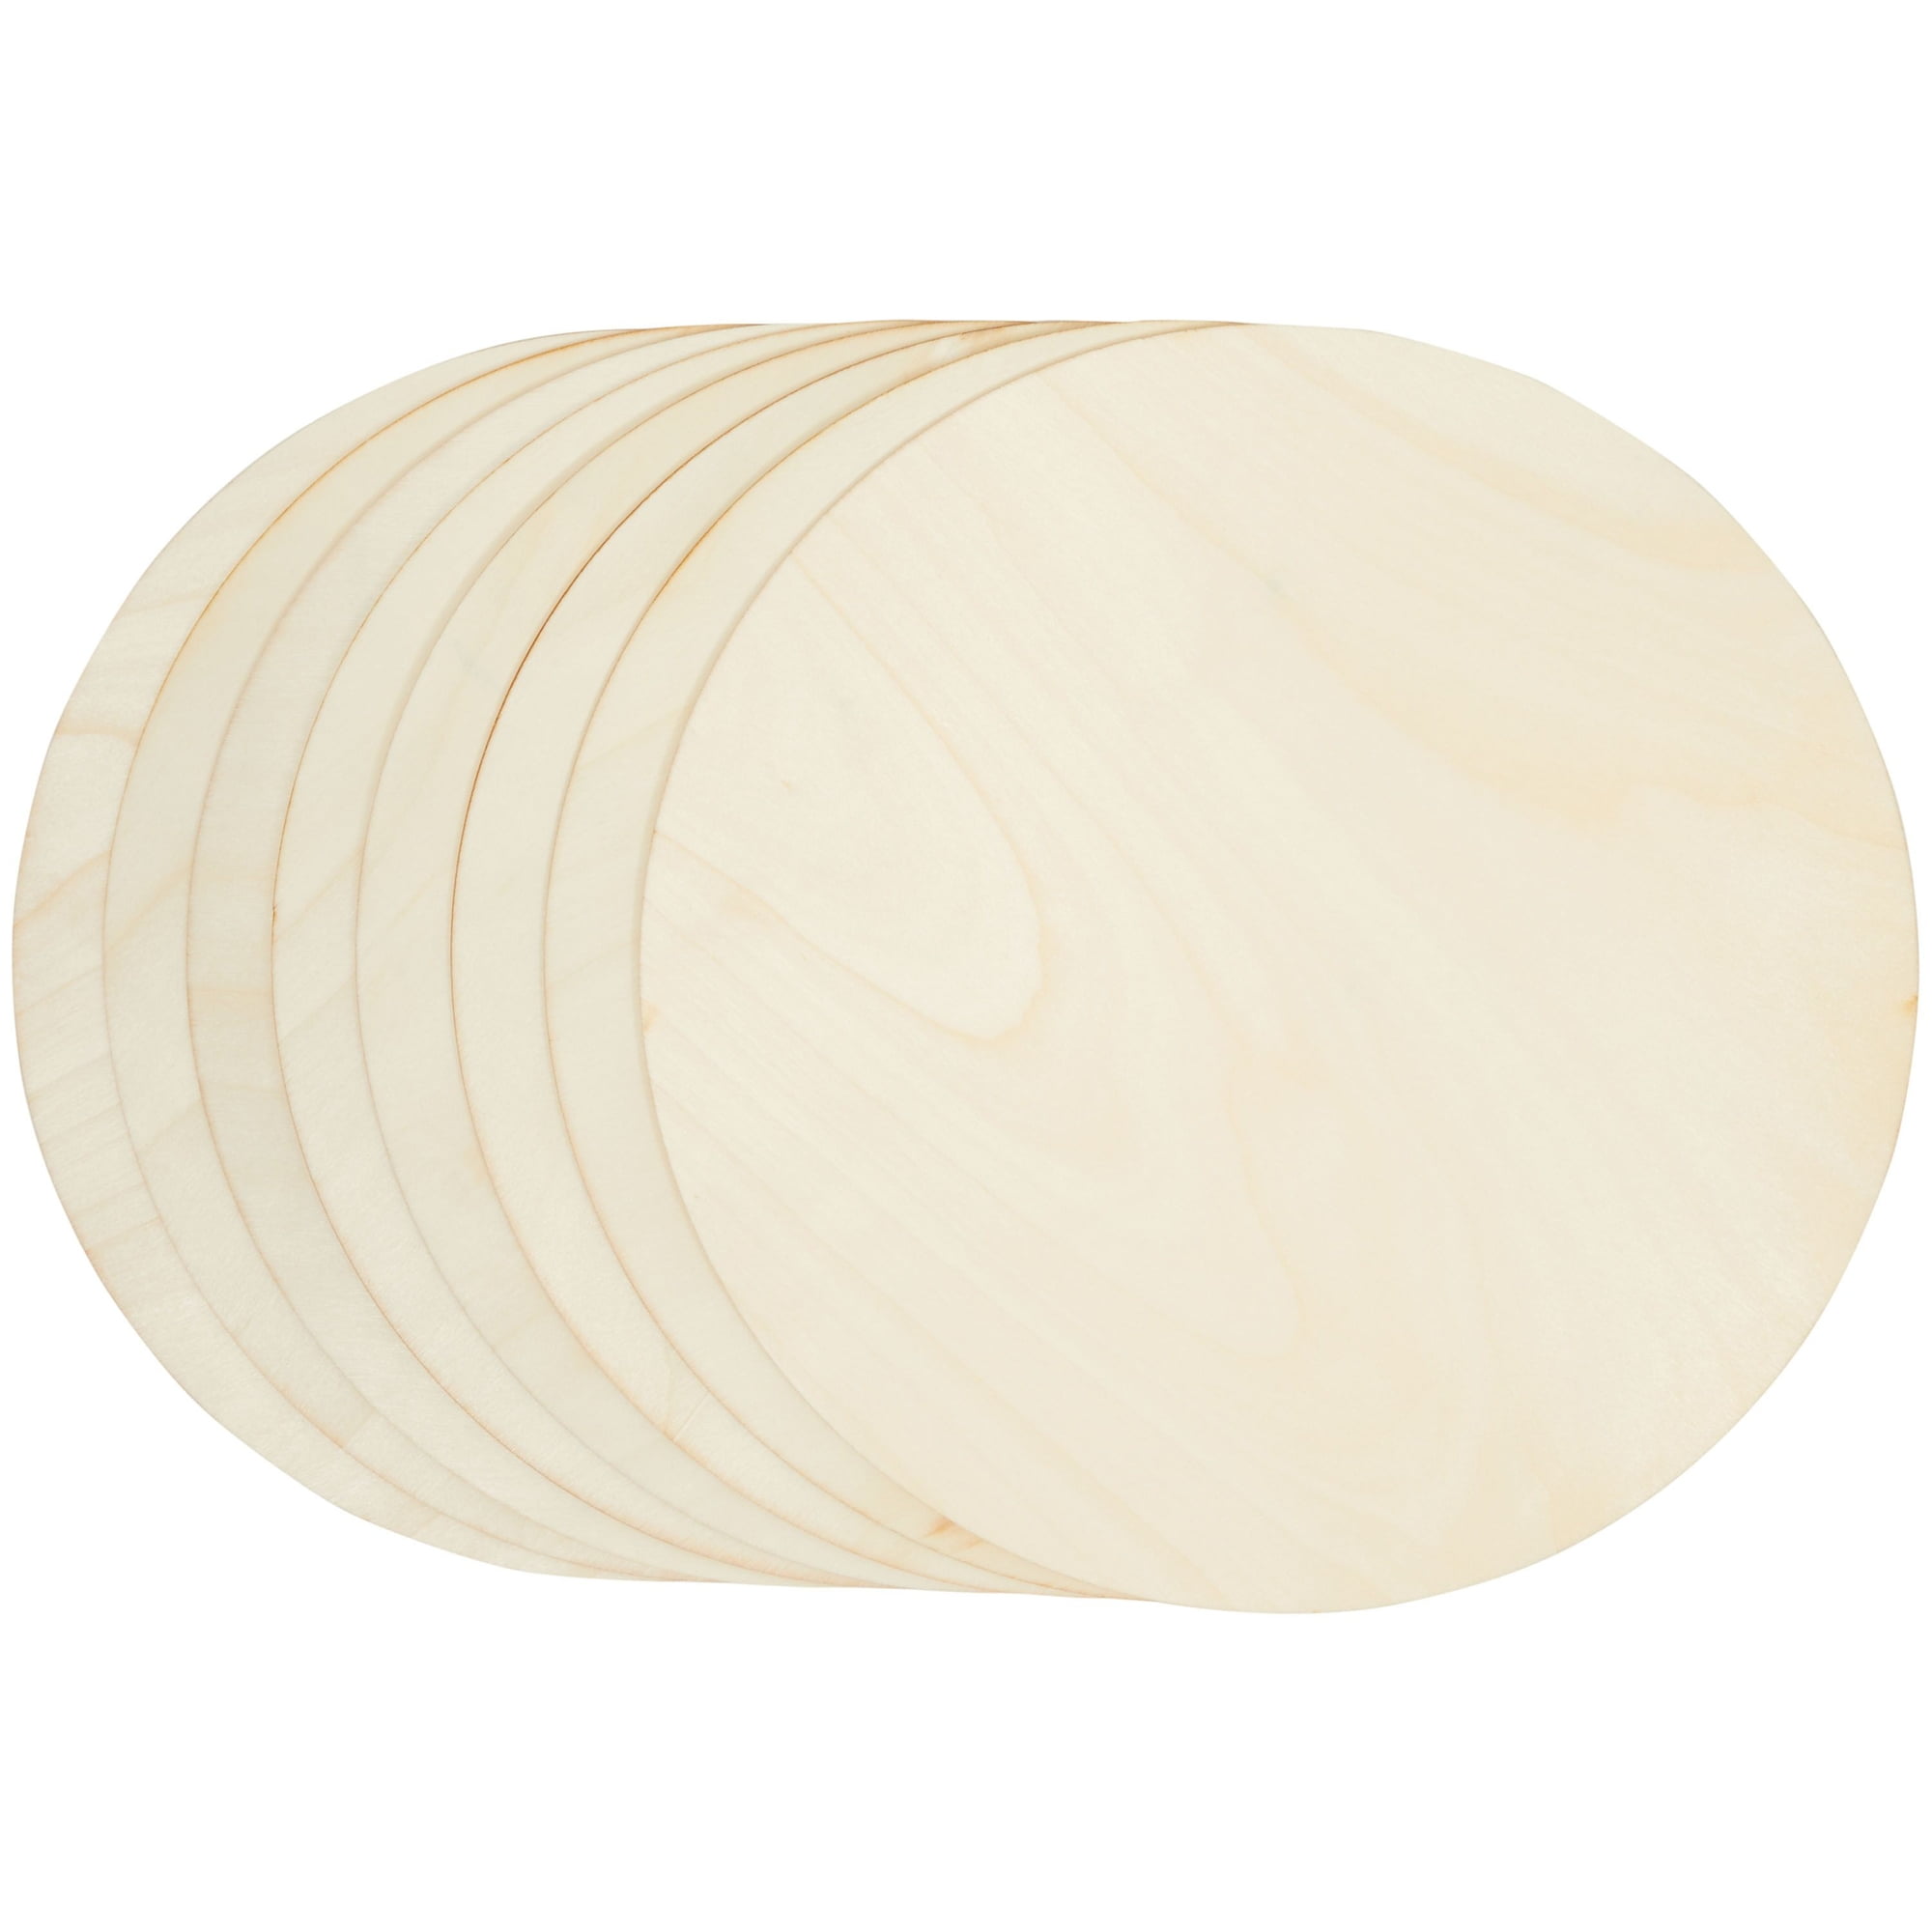 Juvale Unfinished Wood Round Circle Cutouts, 12 inch Wooden Discs for Crafts Projects (8 Pack)